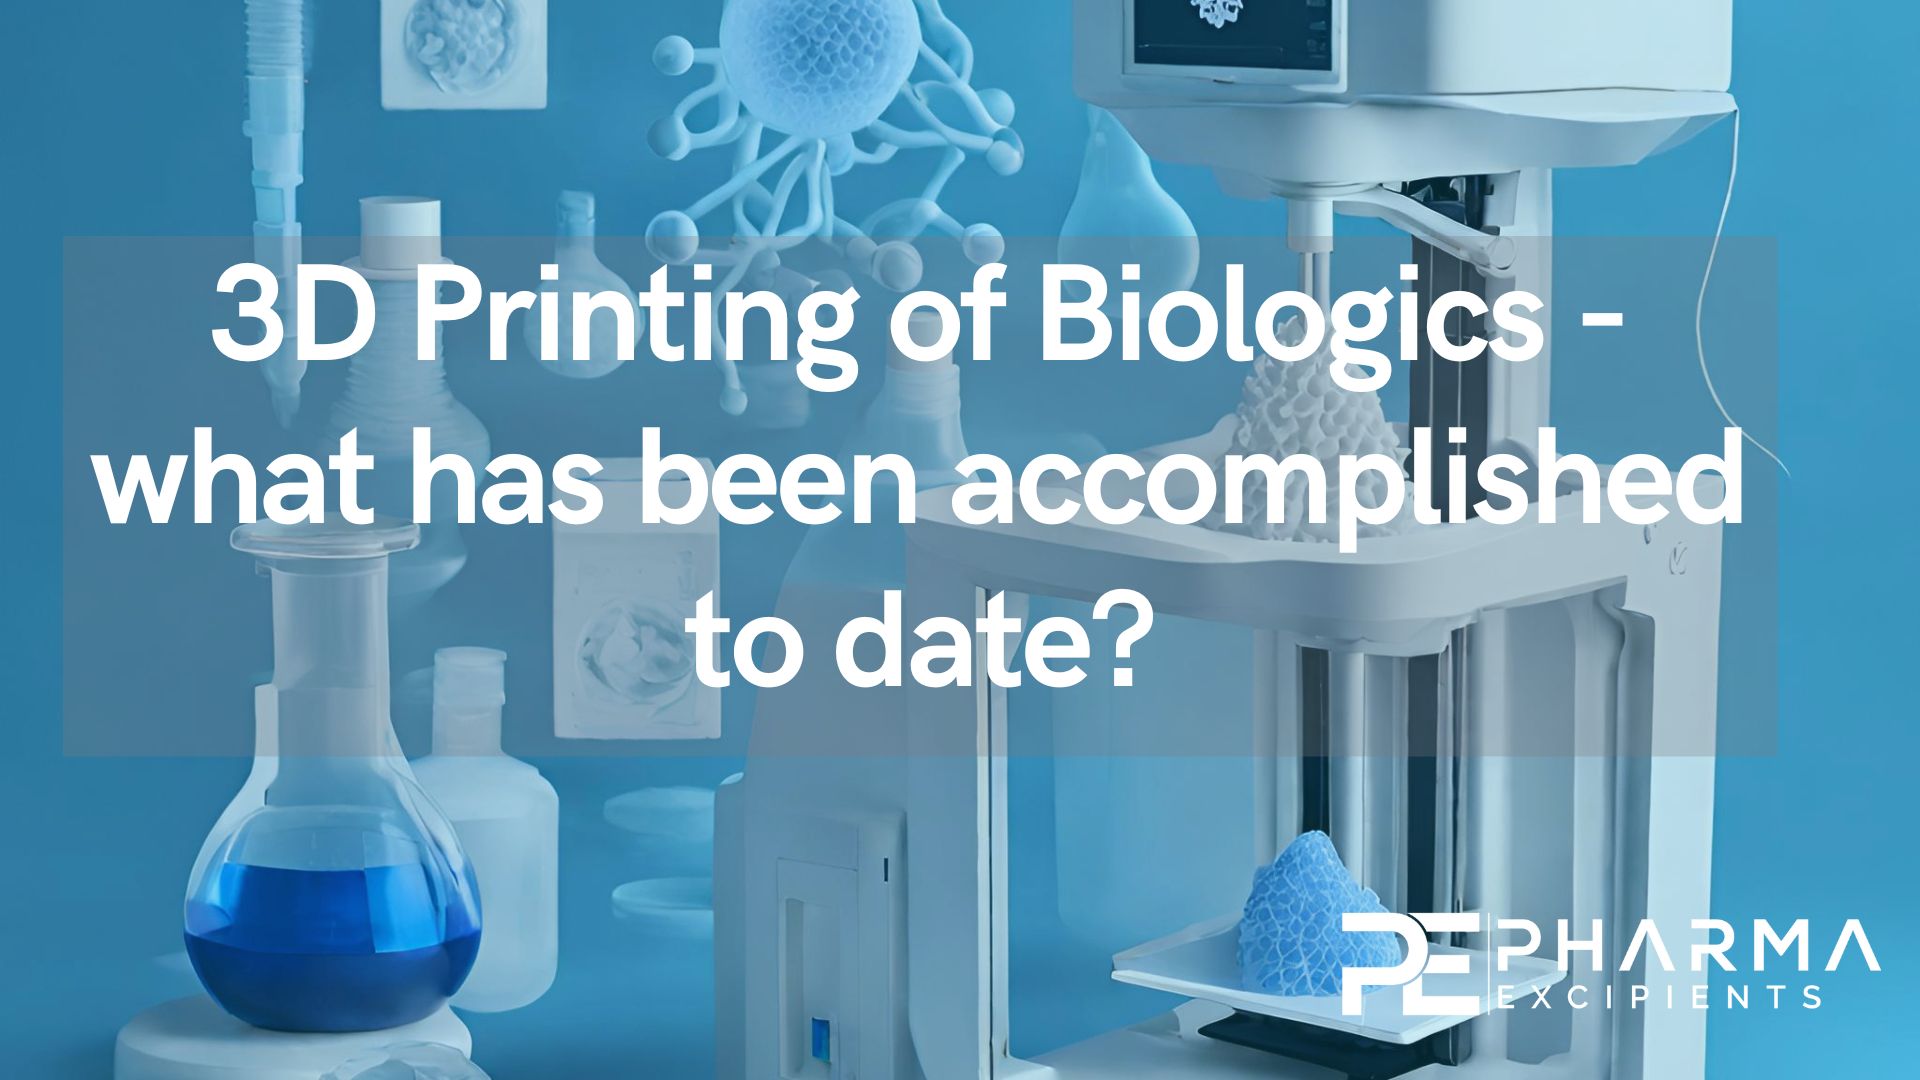 3D Printing of Biologics - what has been accomplished to date?